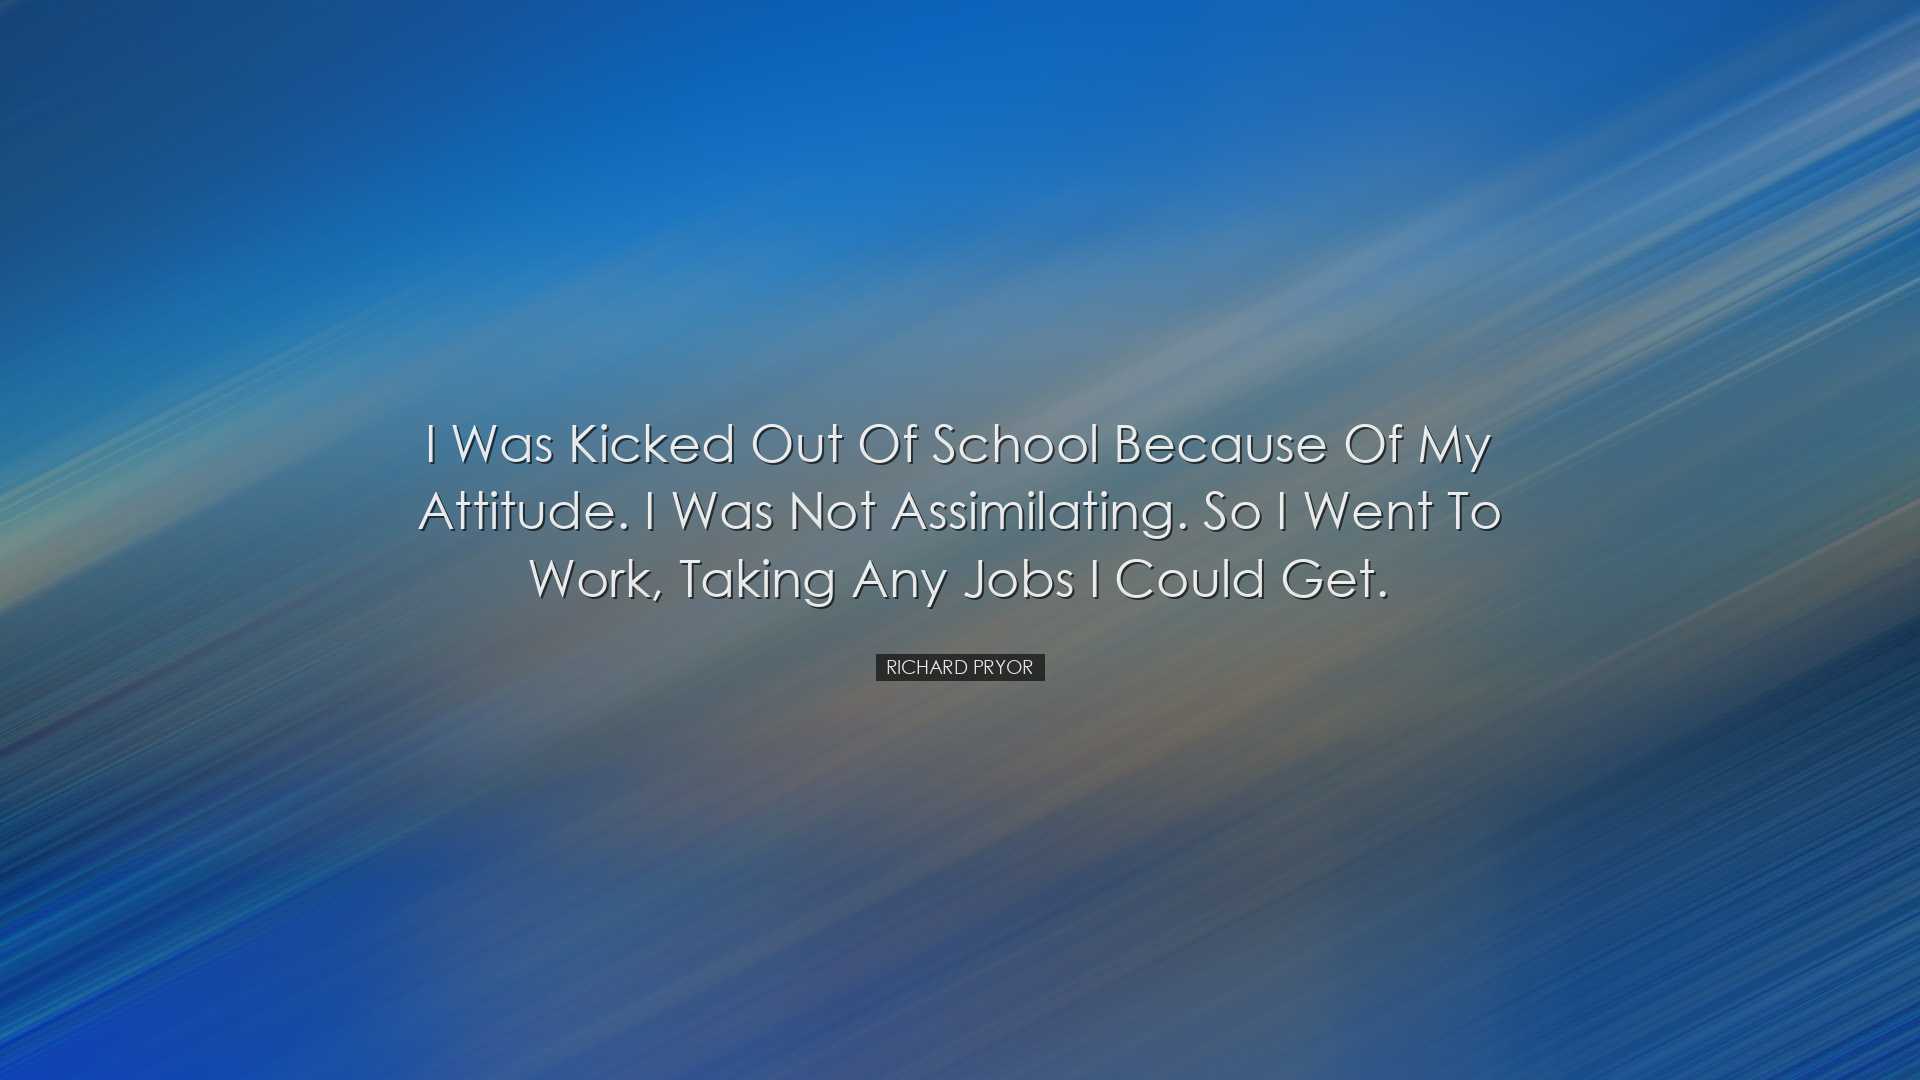 I was kicked out of school because of my attitude. I was not assim